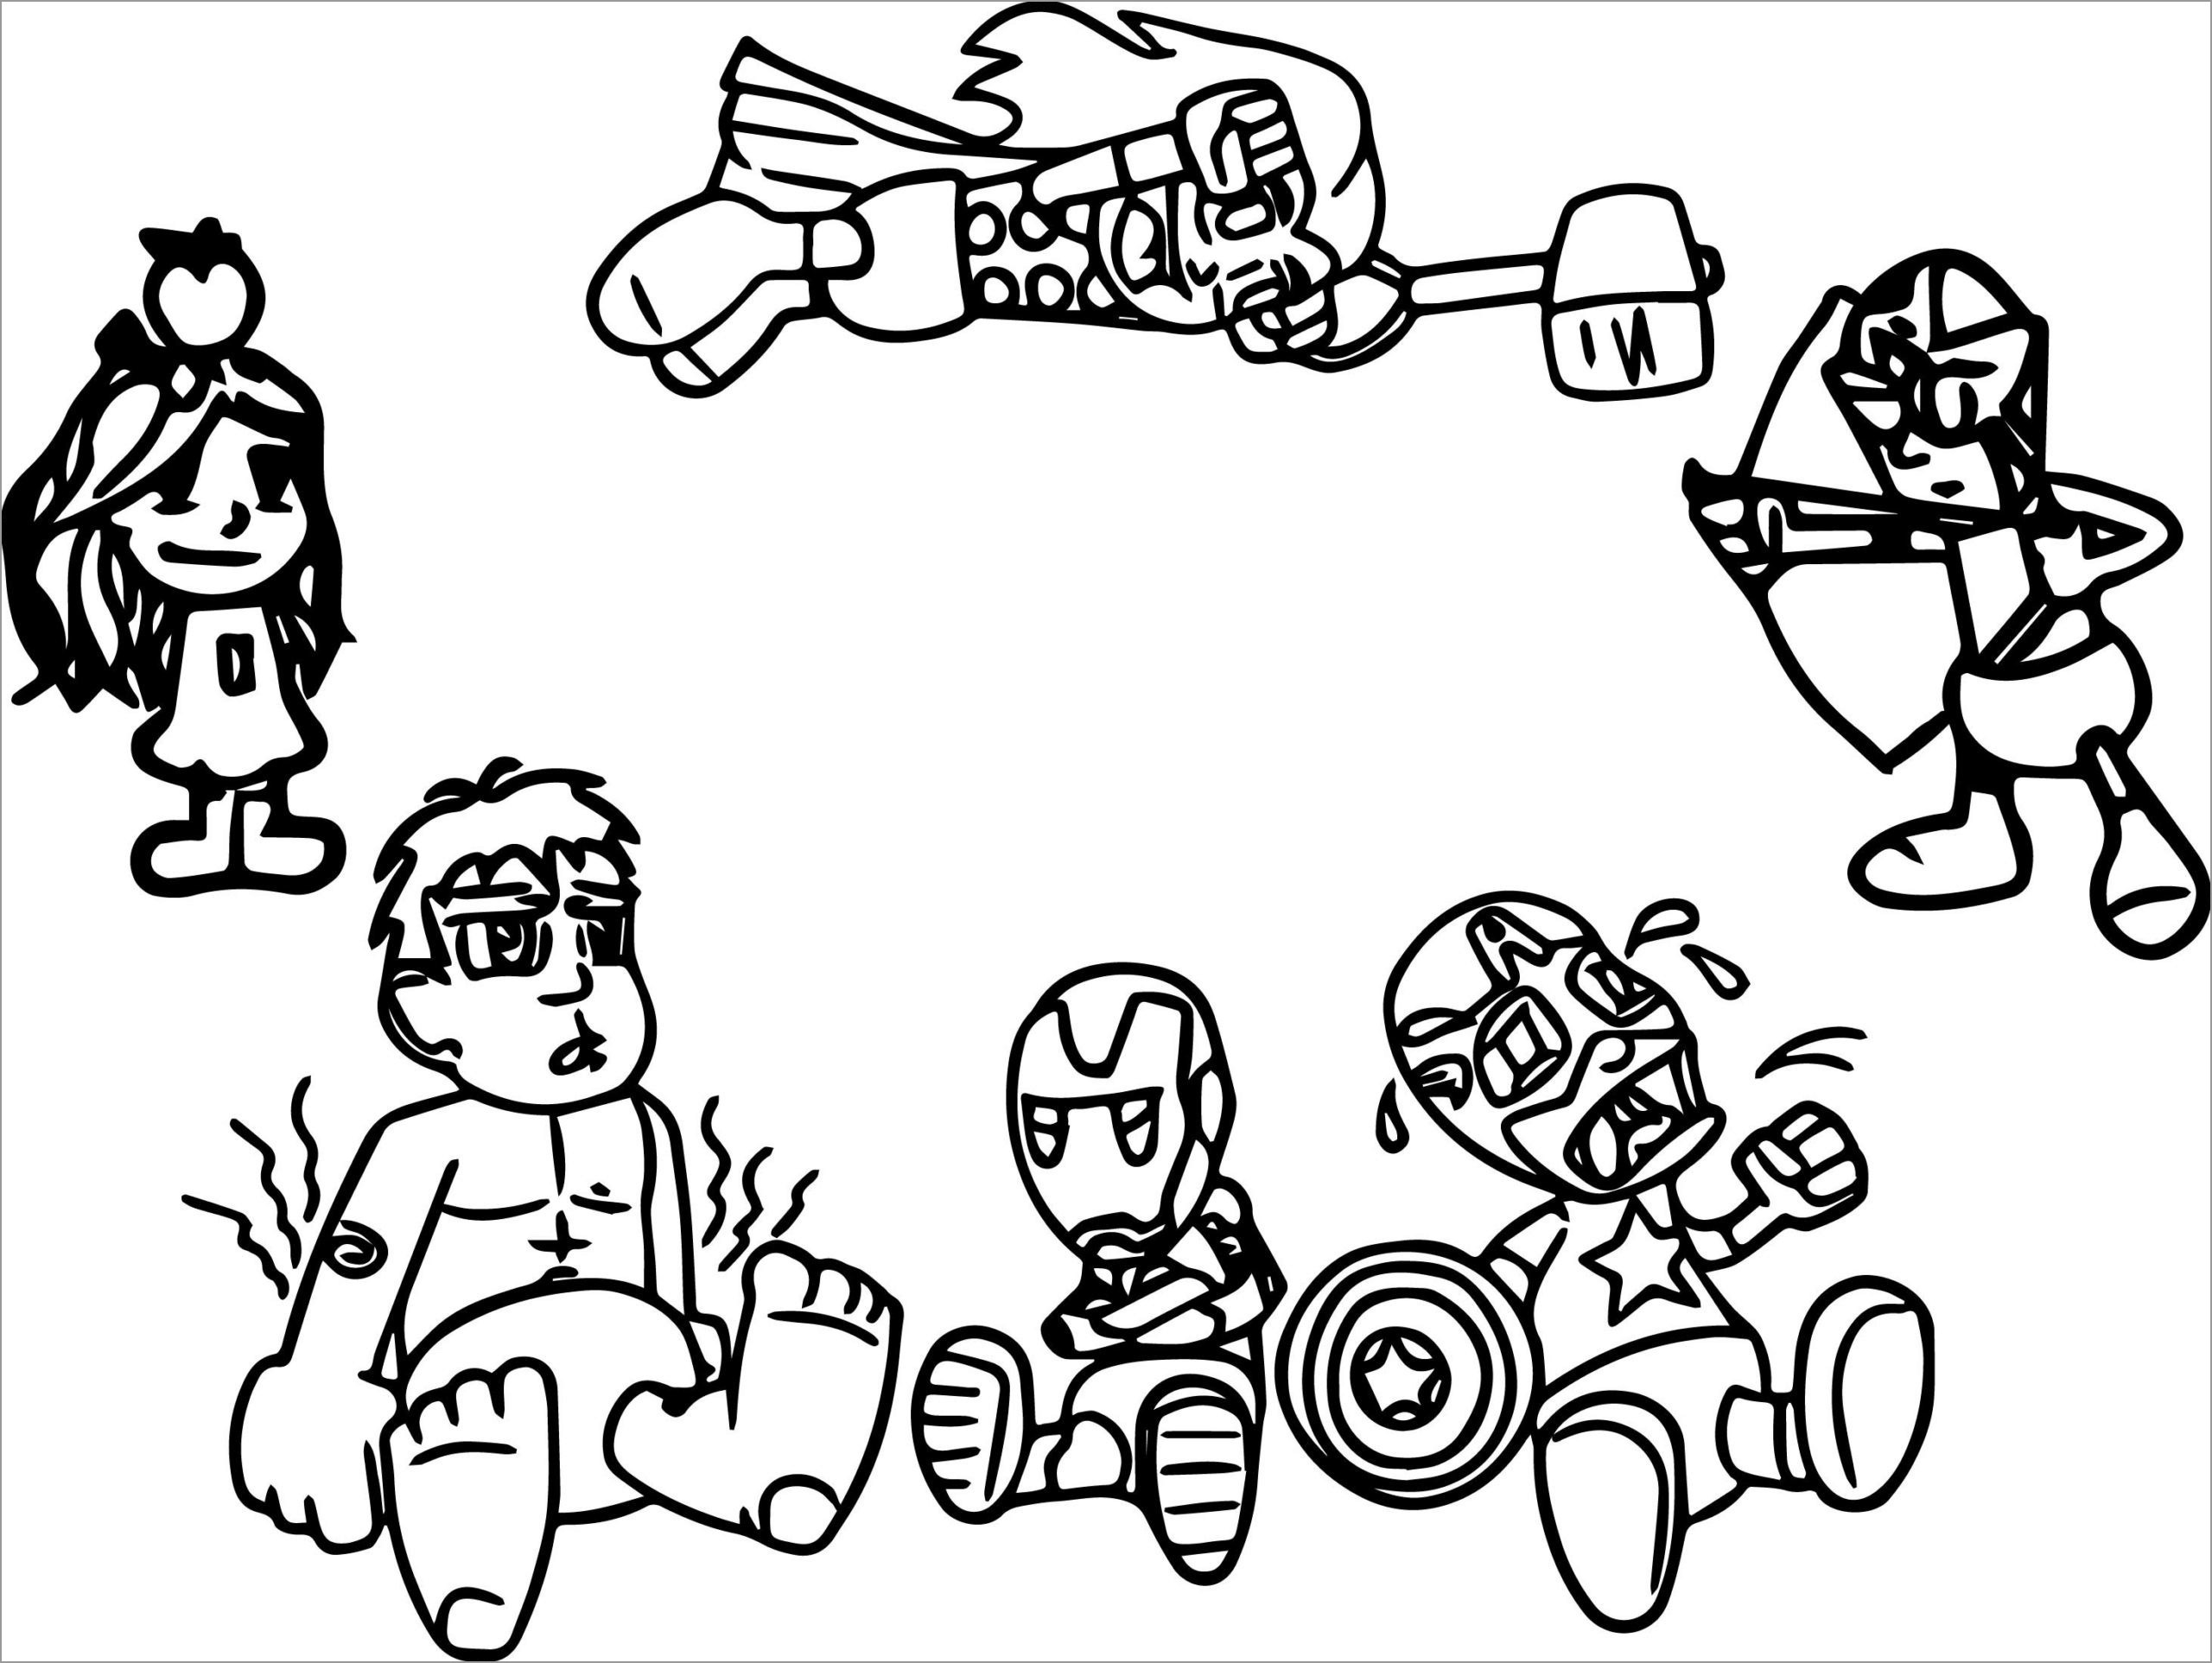 Baby Chibi Avengers Coloring Page   ColoringBay